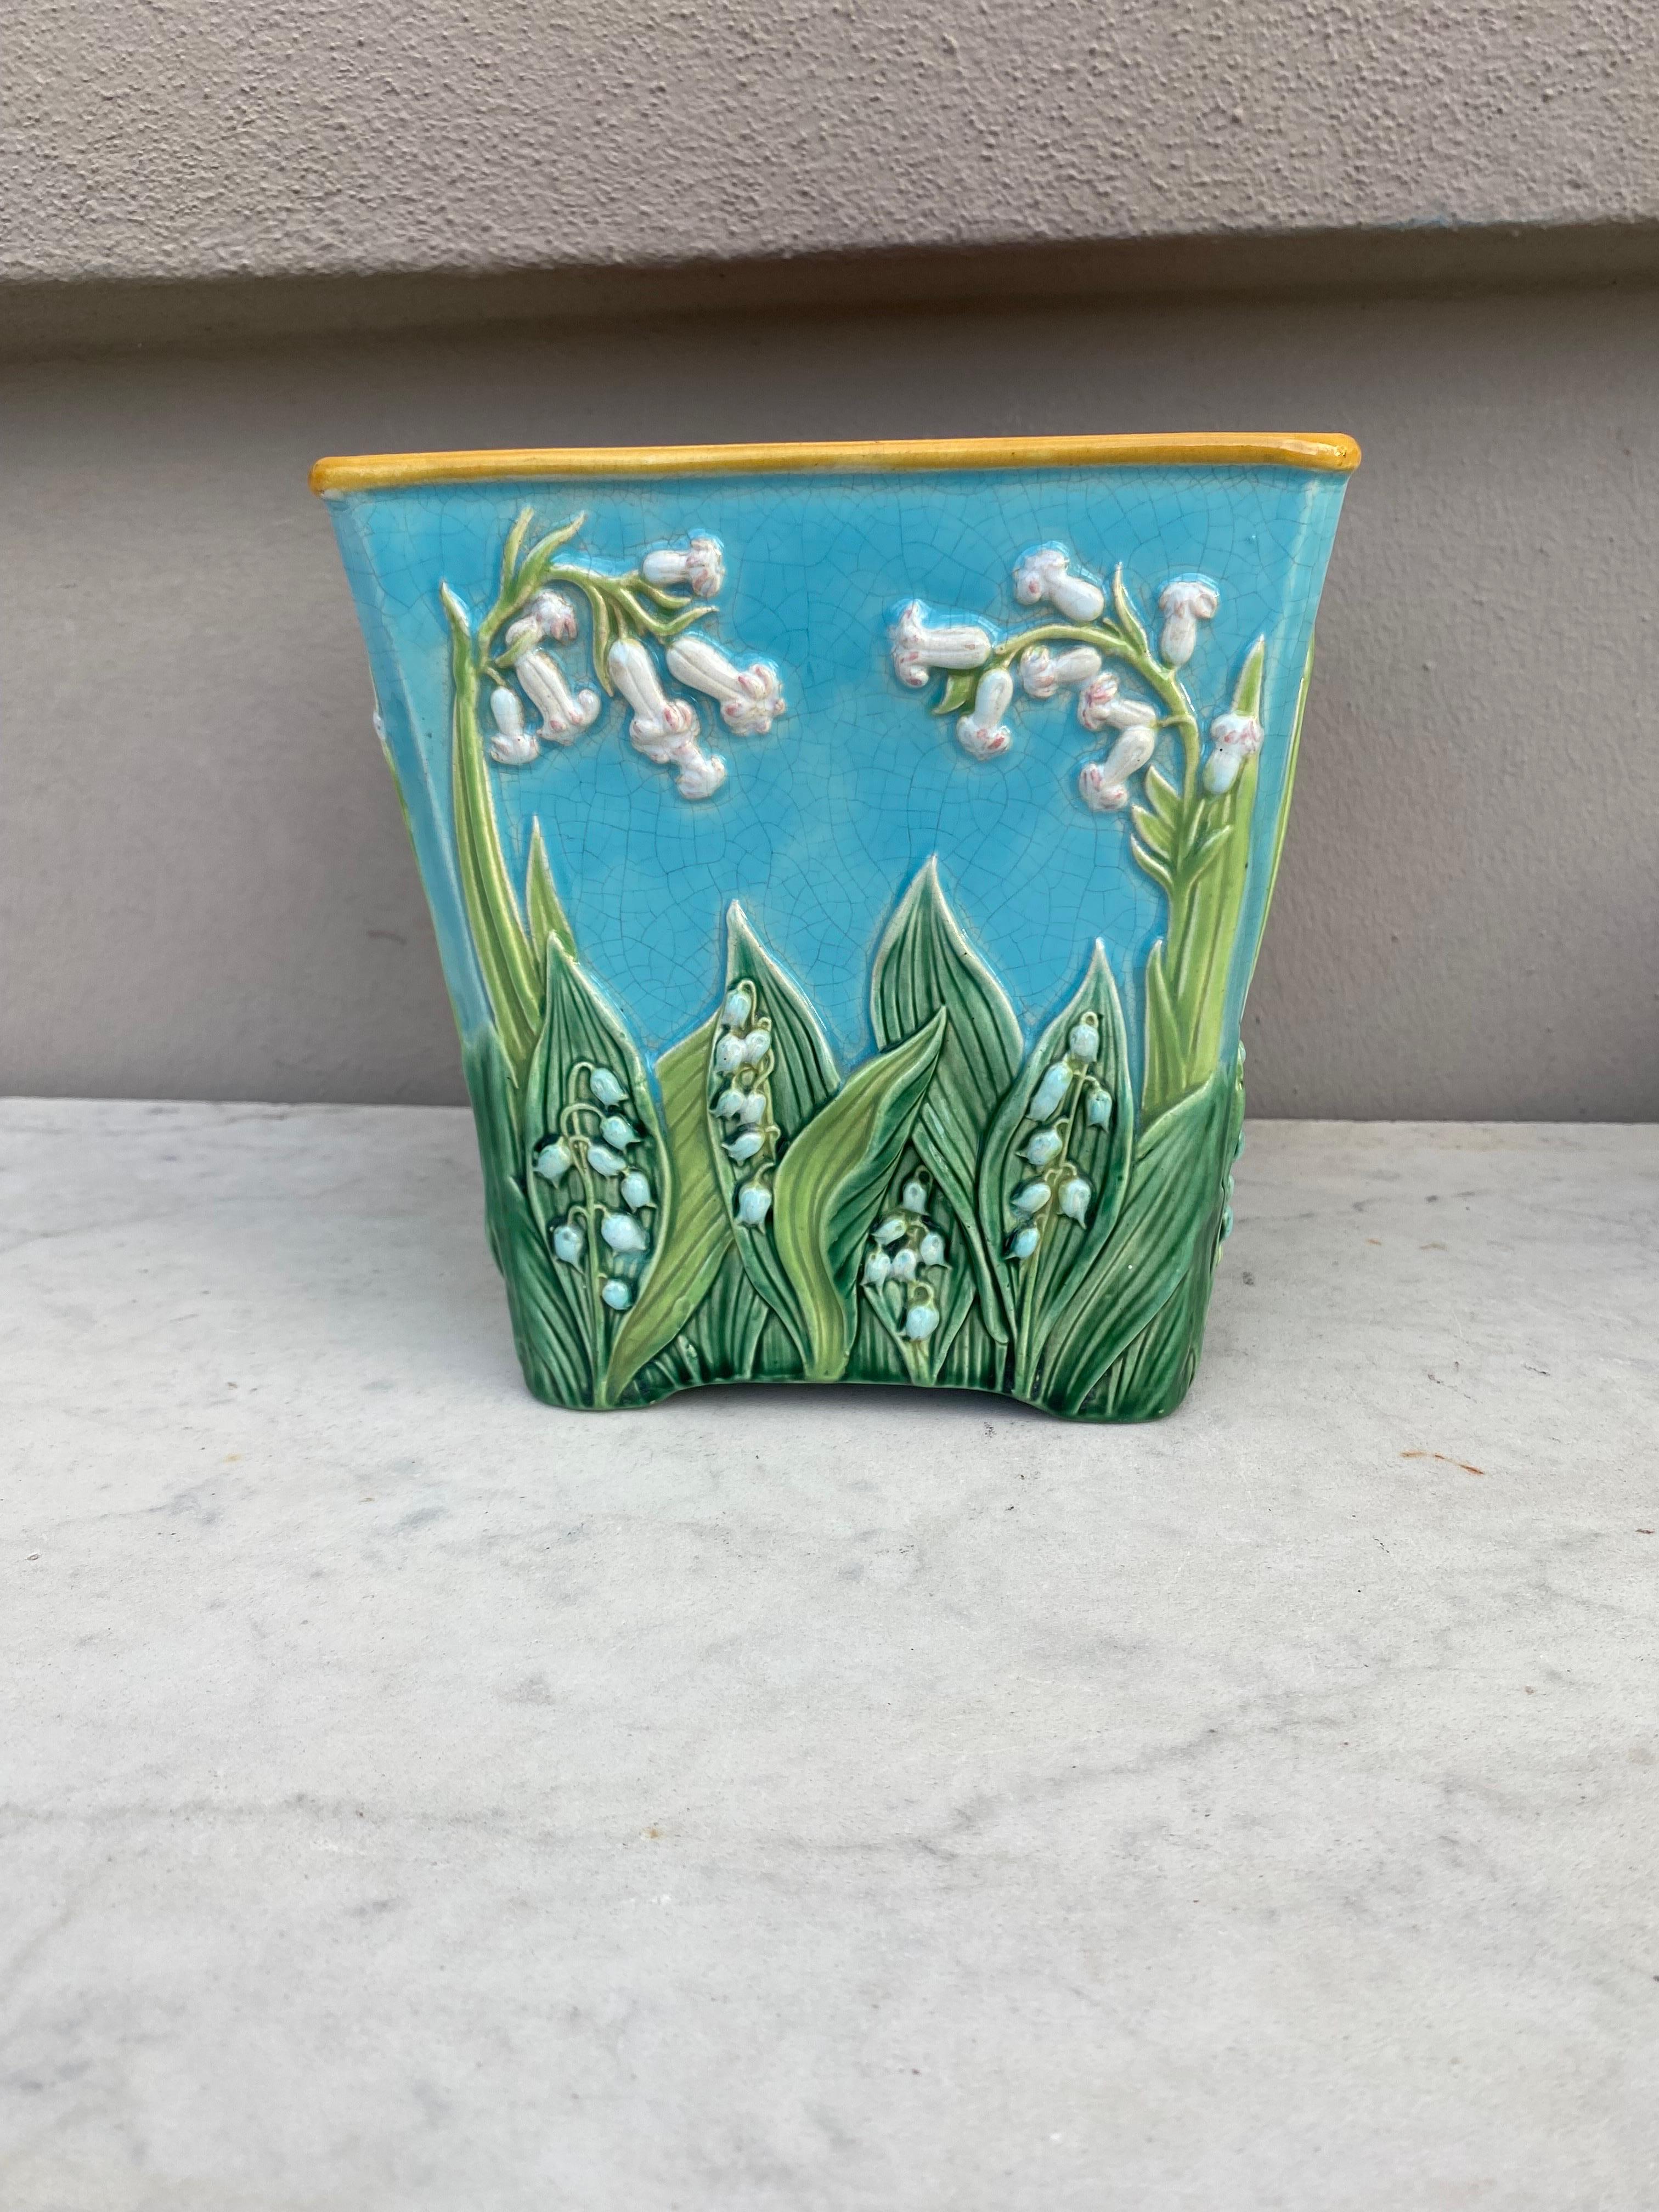 Victorian 19th Century square Majolica Aqua jardinière signed George Jones, Pattern No. 2295, the turquoise ground decorated with lilies of the valley in relief.
An excellent example of the elegance of the Victorian Majolica.
Rare small size , H /